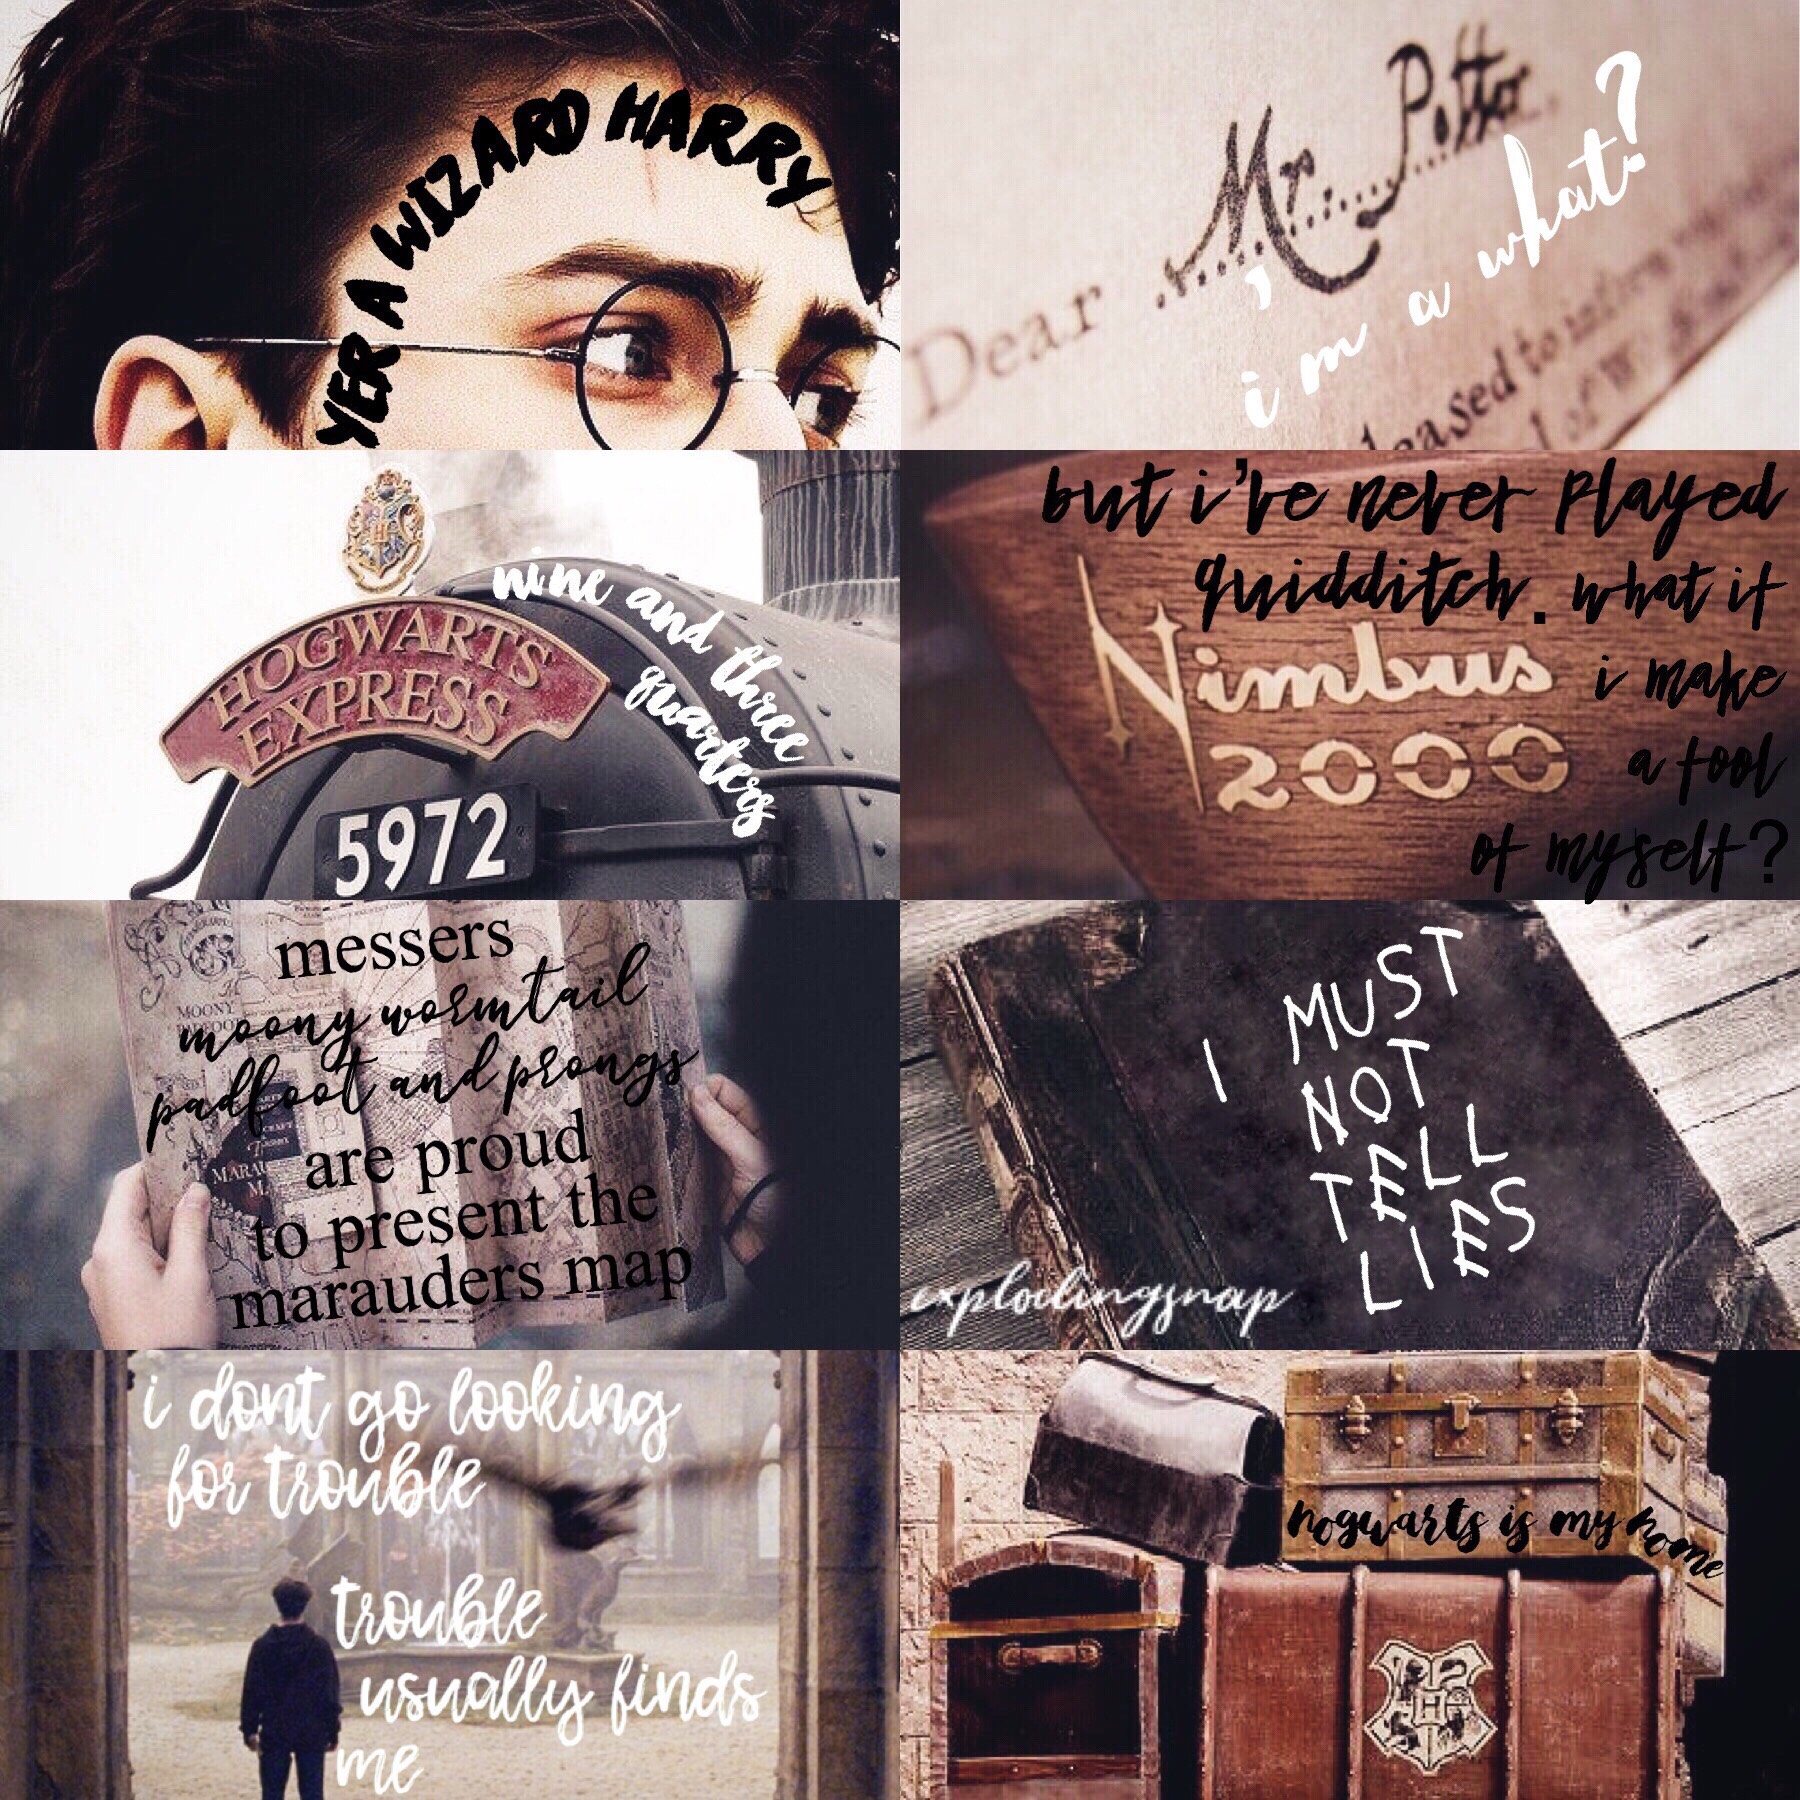 t a p 

harry potter

it’s another one of rainsturhm’s accounts! 

i make these edits and post theme on insta (@athcnv) and i thought i’d share them with you!

have a wonderful day